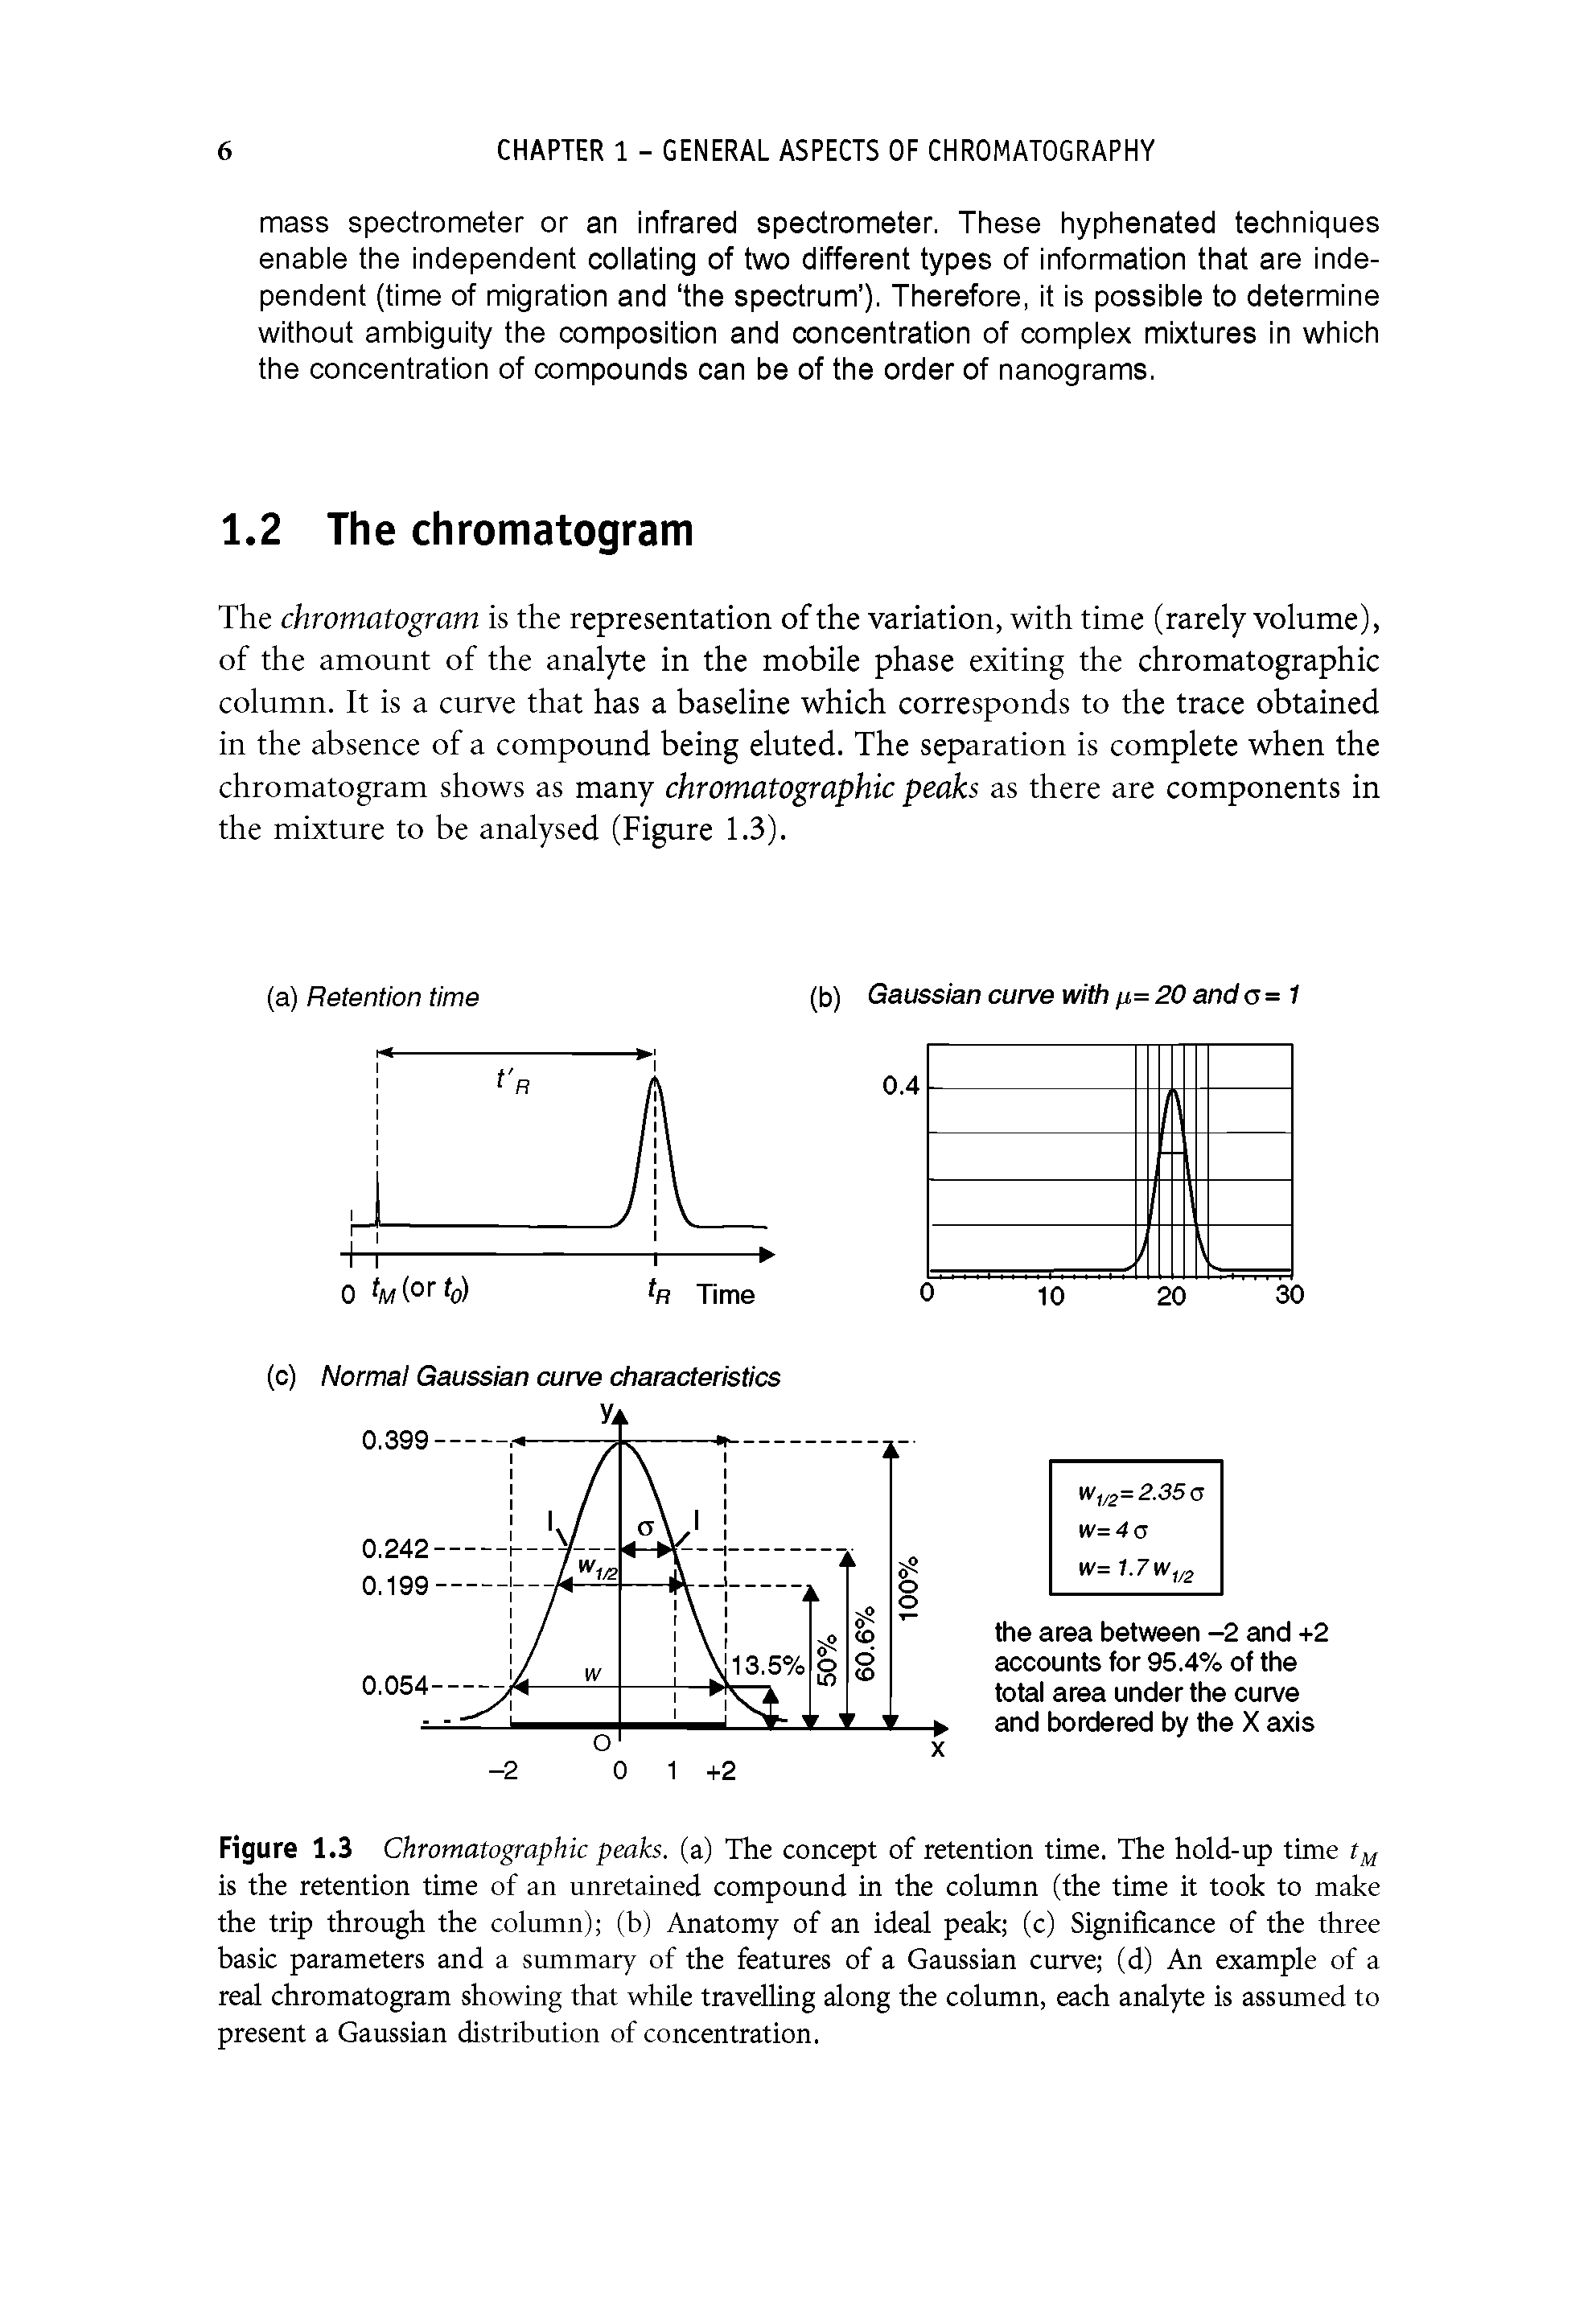 Figure 1.3 Chromatographic peaks, (a) The concept of retention time. The hold-up time is the retention time of an unretained compound in the column (the time it took to make the trip through the column) (b) Anatomy of an ideal peak (c) Significance of the three basic parameters and a summary of the features of a Gaussian curve (d) An example of a real chromatogram showing that while travelling along the column, each analyte is assumed to present a Gaussian distribution of concentration.